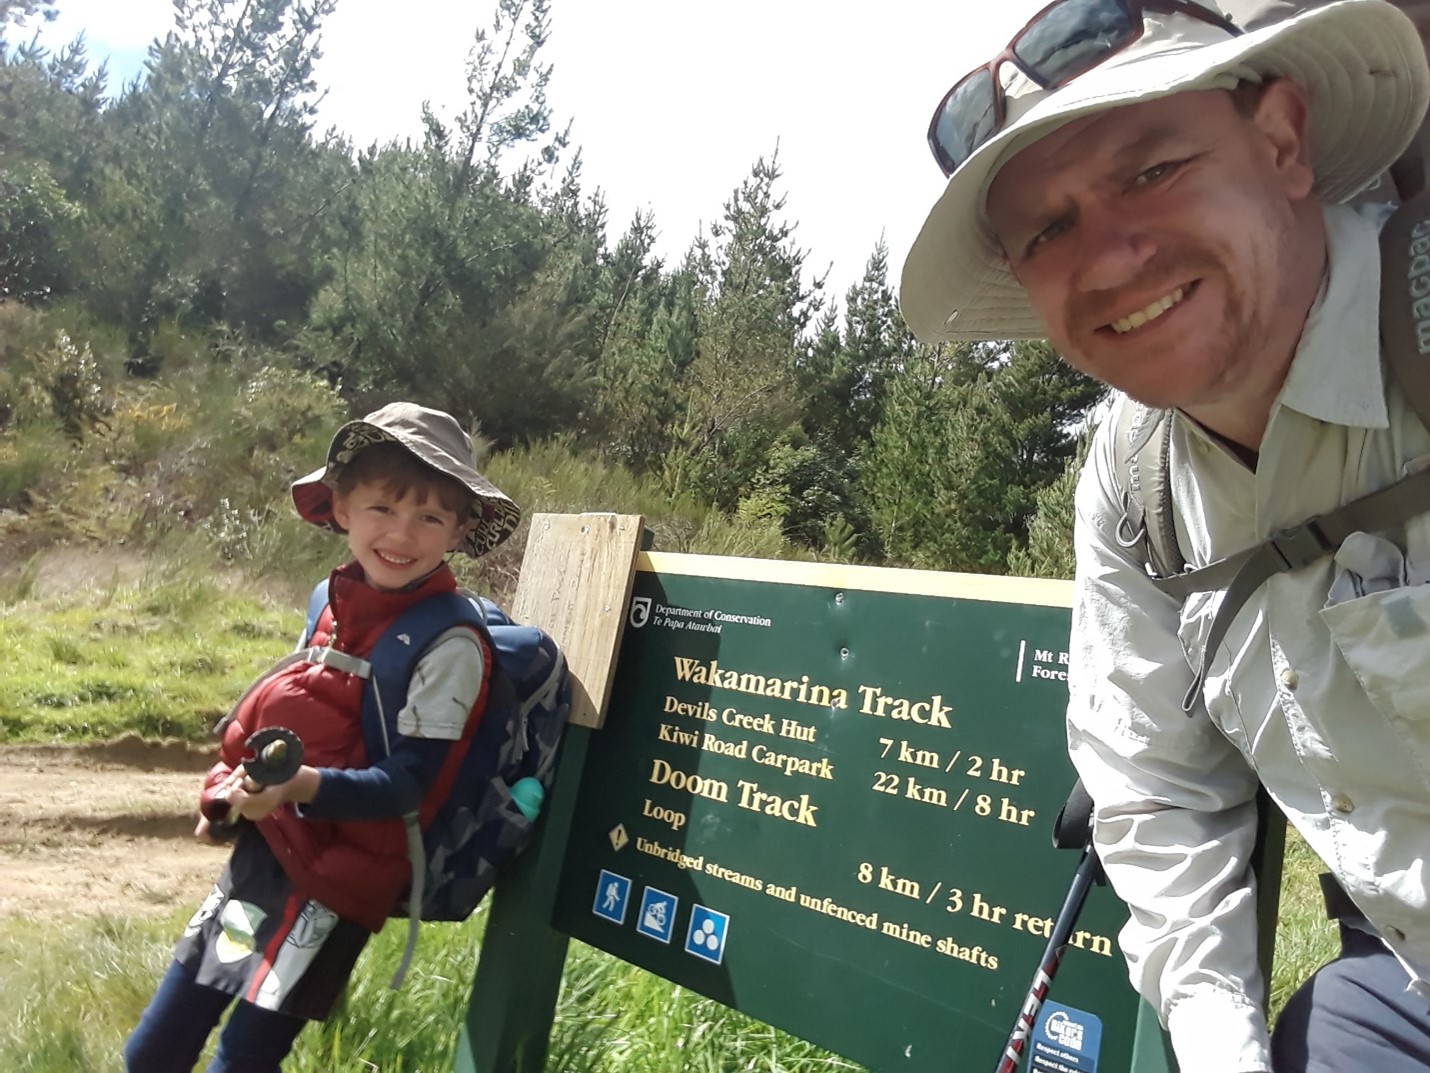 Matt Miller and son posing in front of the Wakamarina and Doom Tracks sign at a trailhead